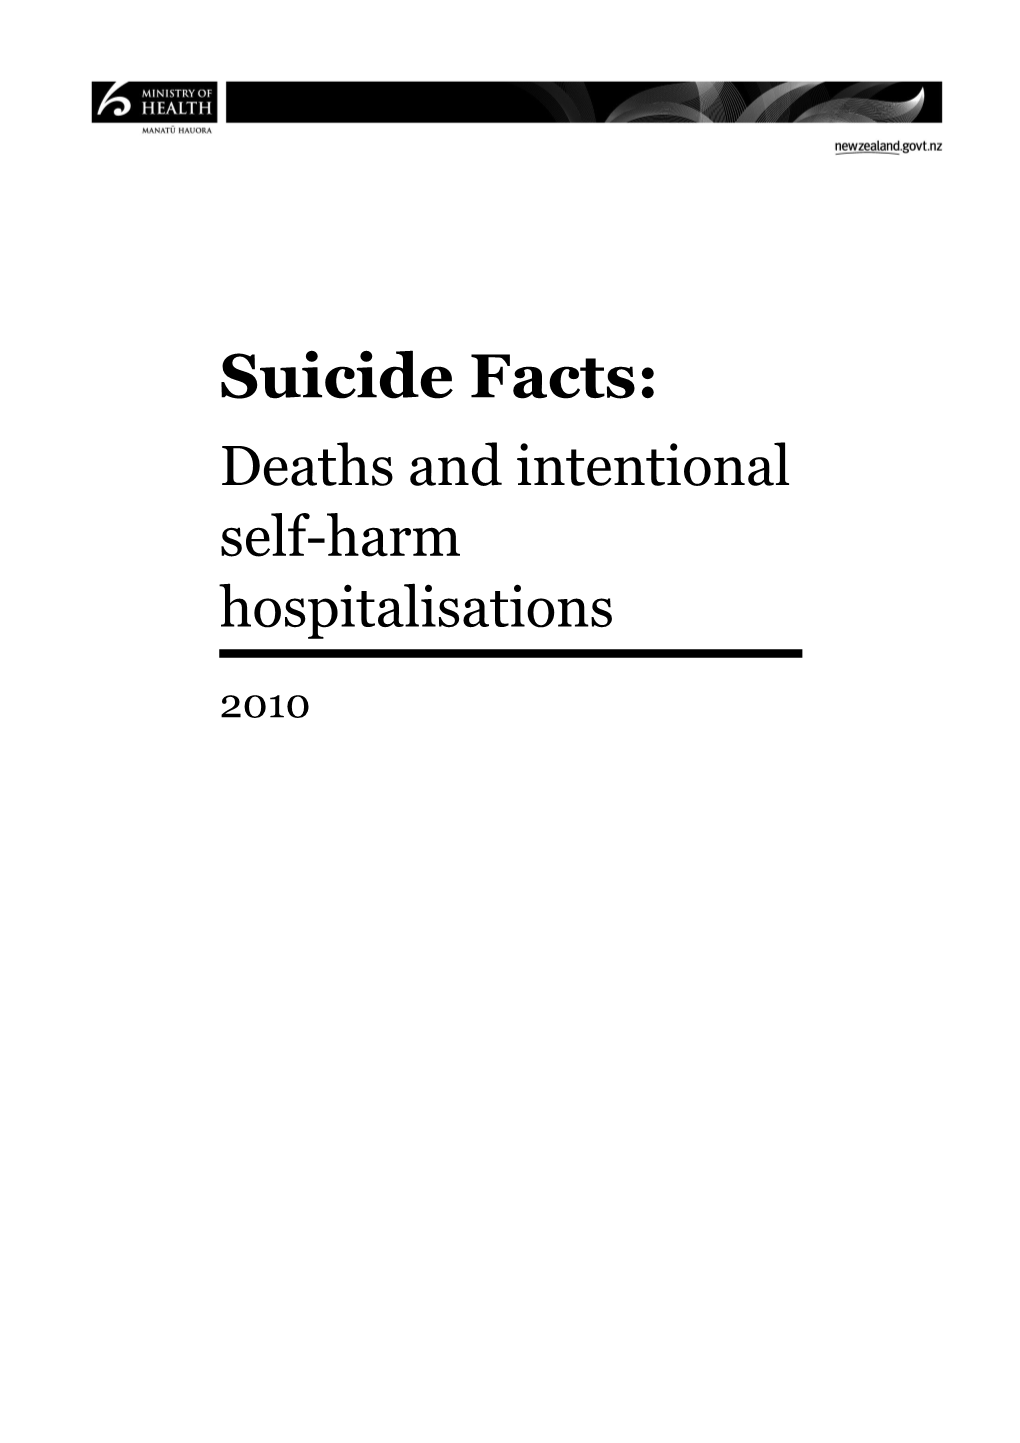 Deaths and Intentional Self-Harm Hospitalisations